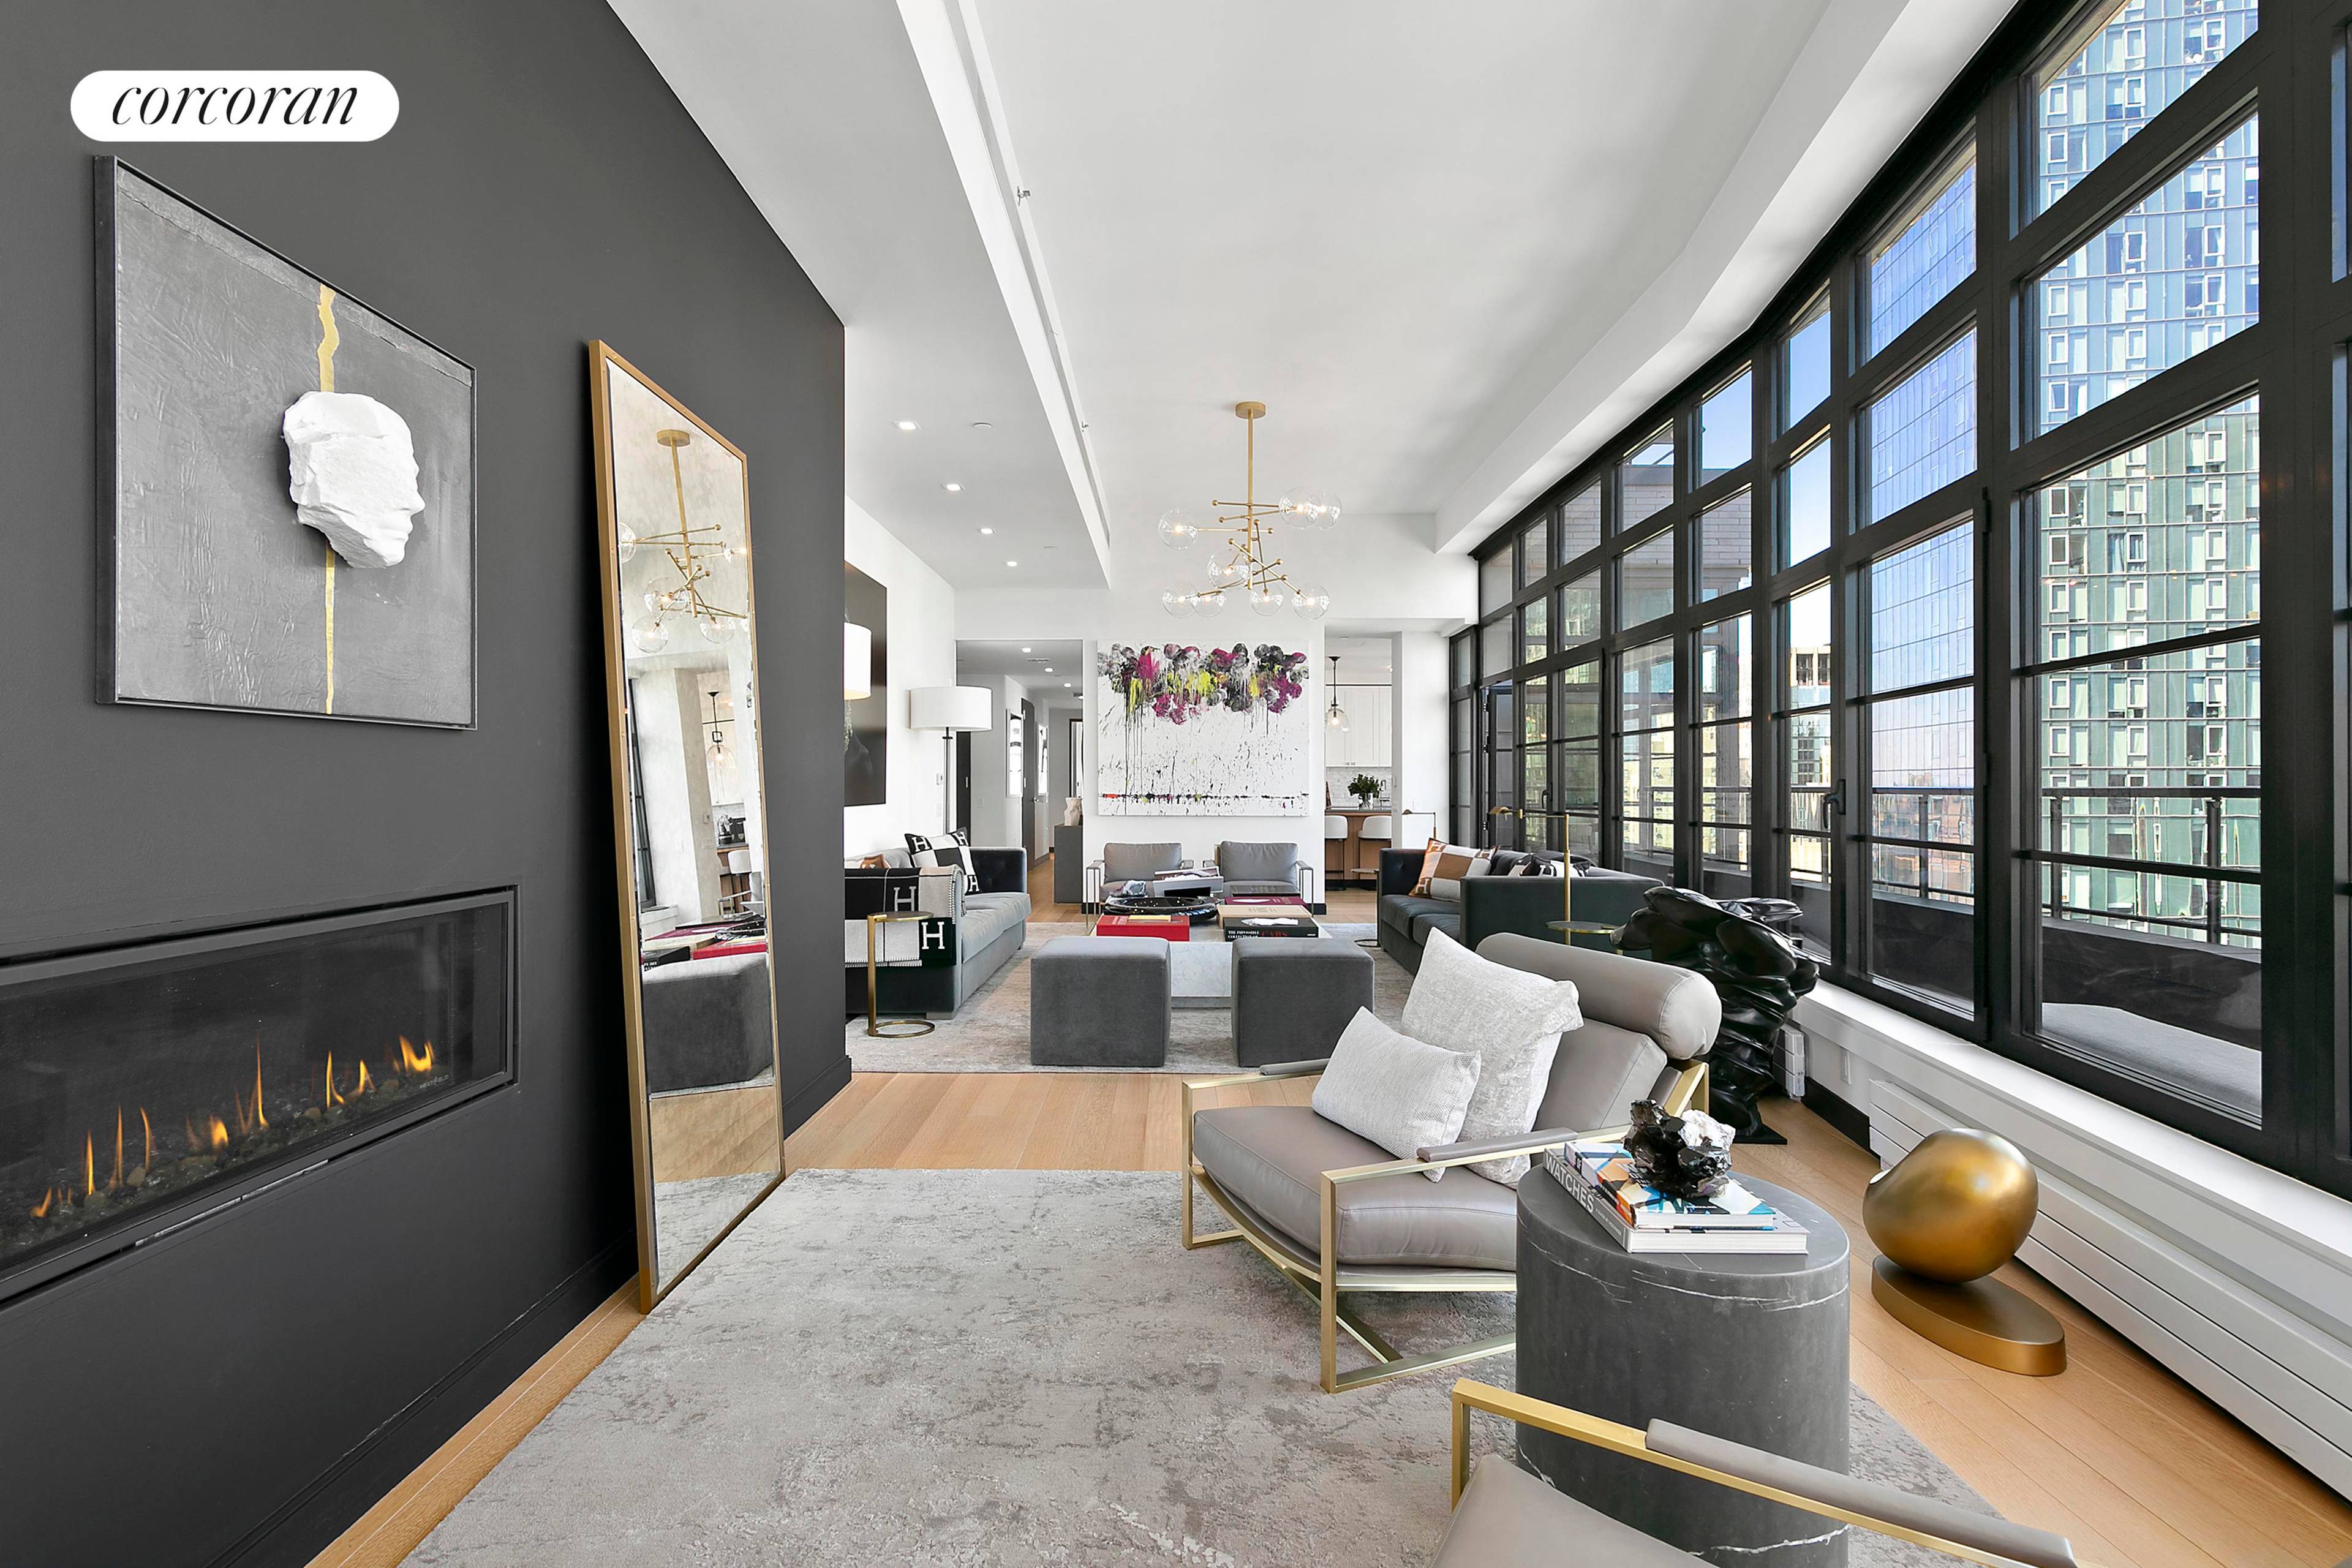 Introducing 50 West 30th Street PH2.